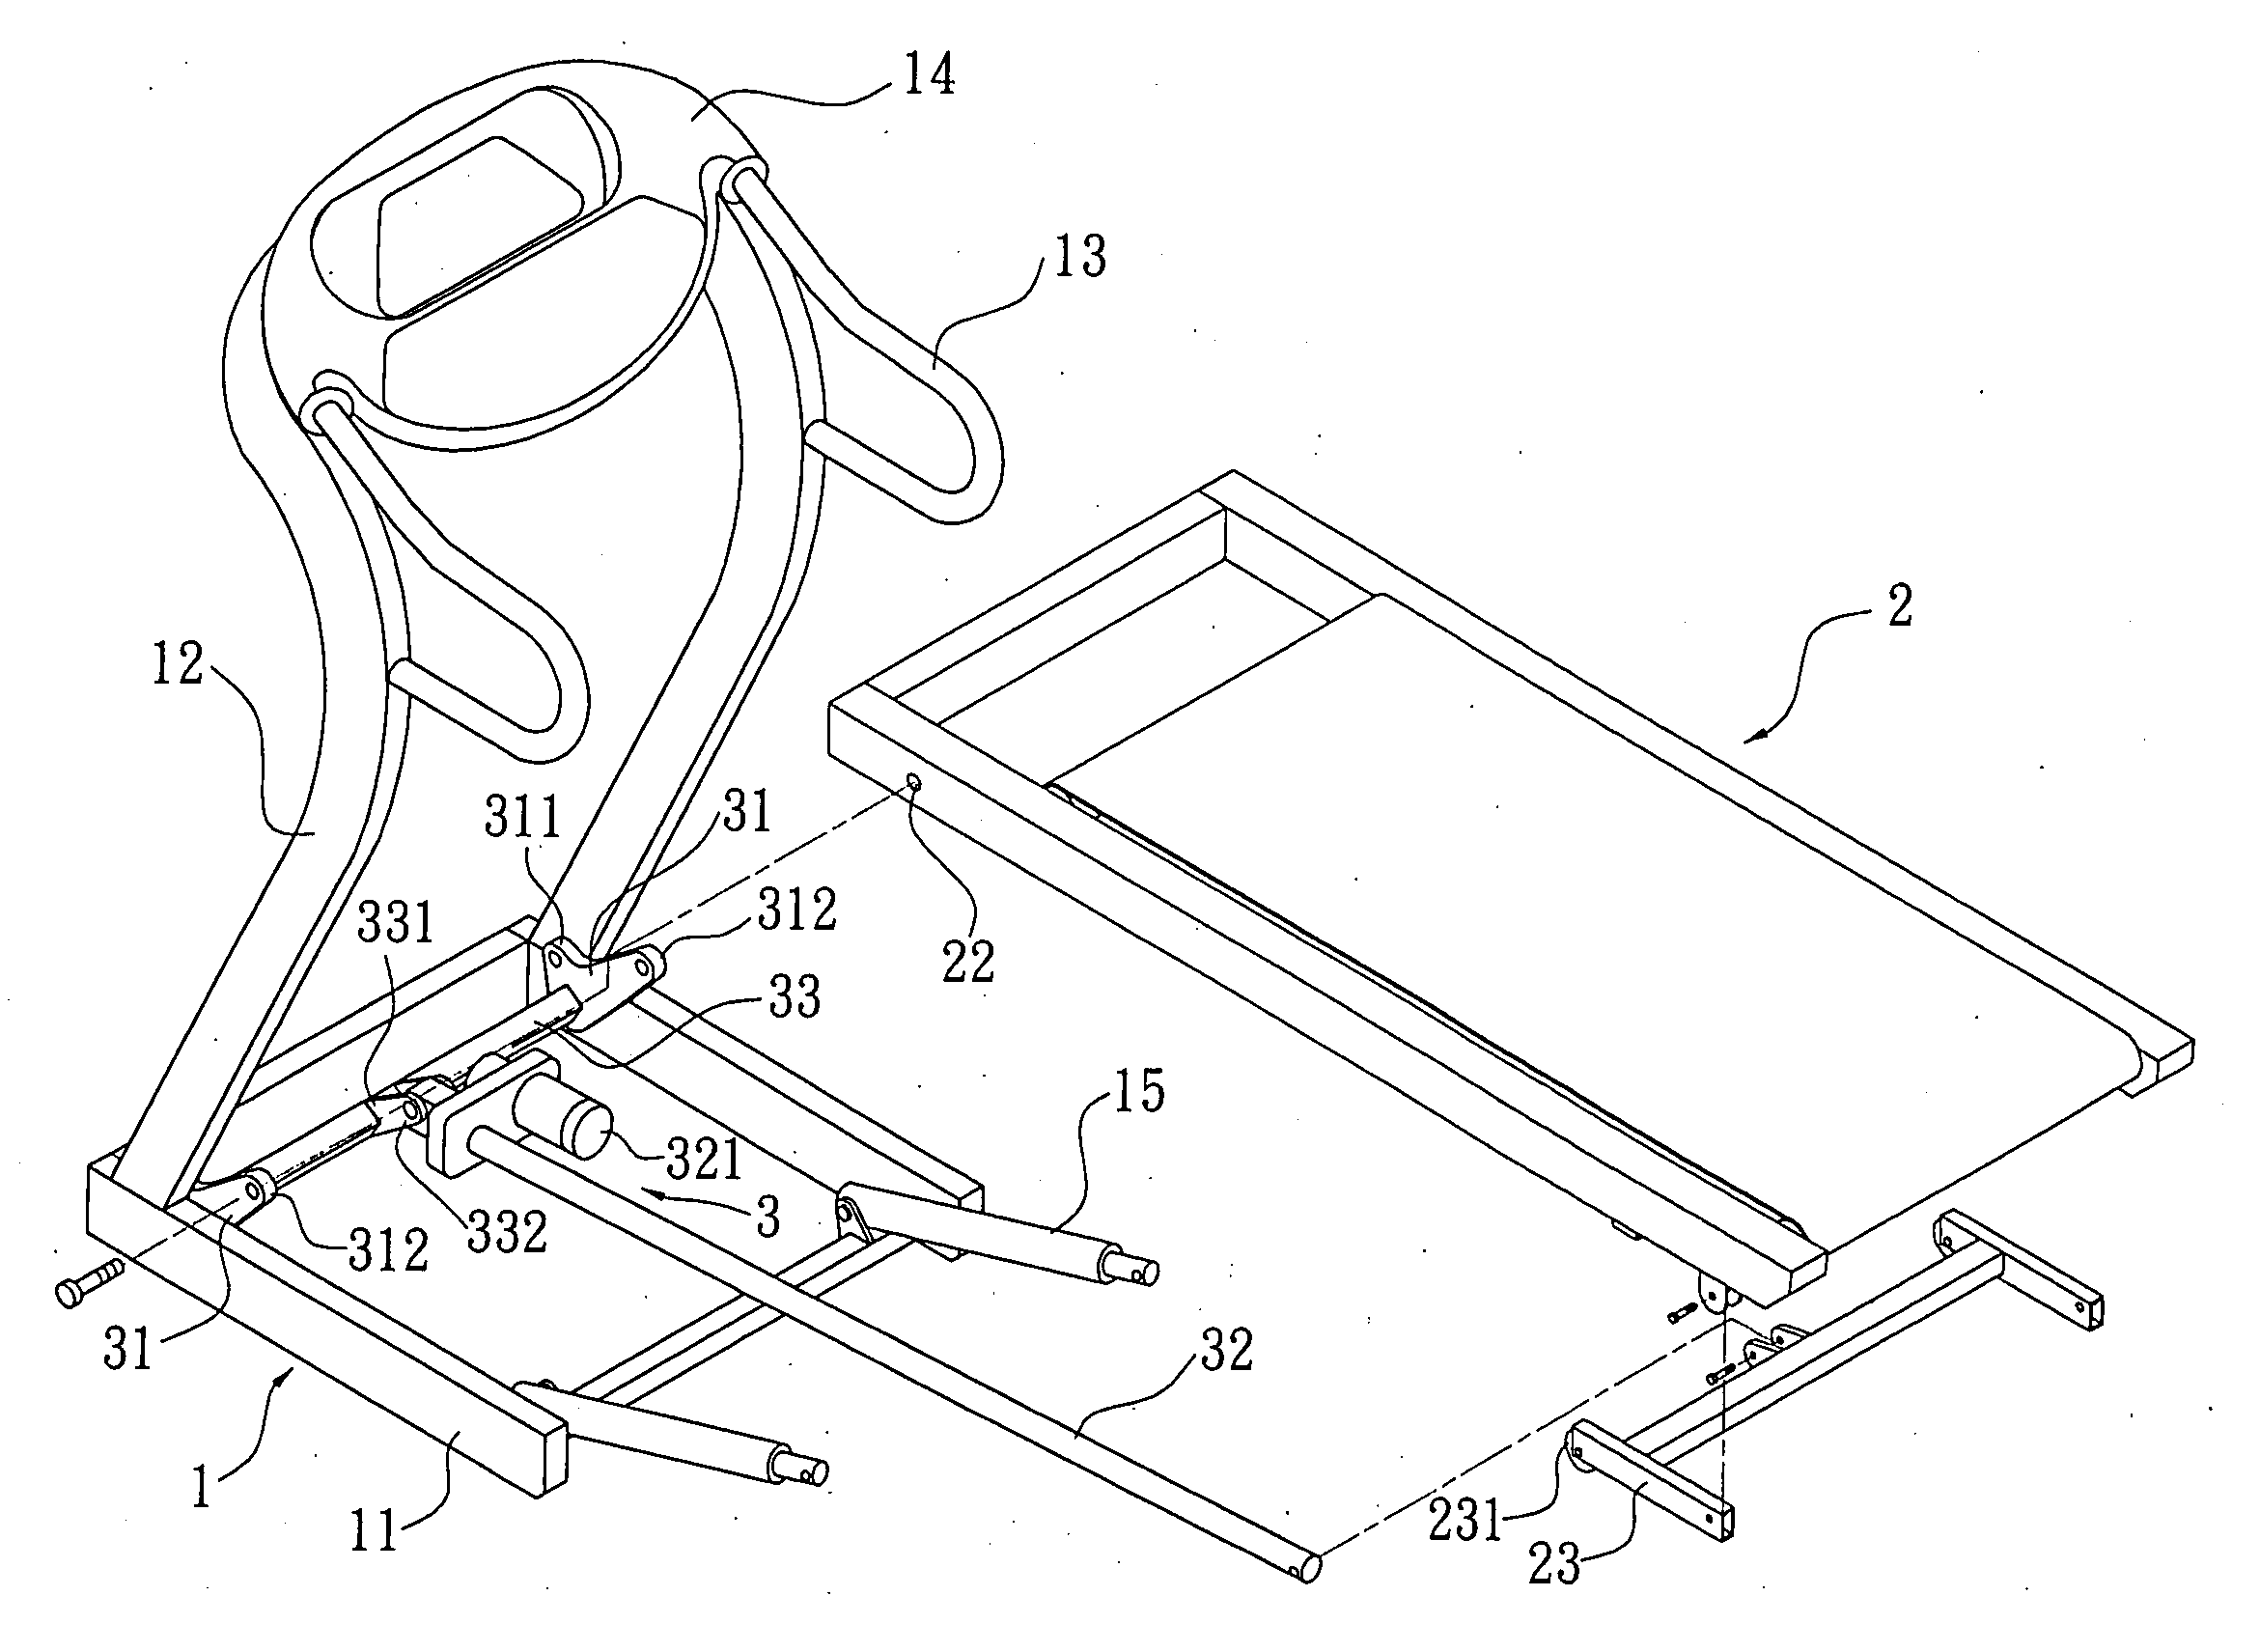 Treadmill with front and rear inclination adjustment unit